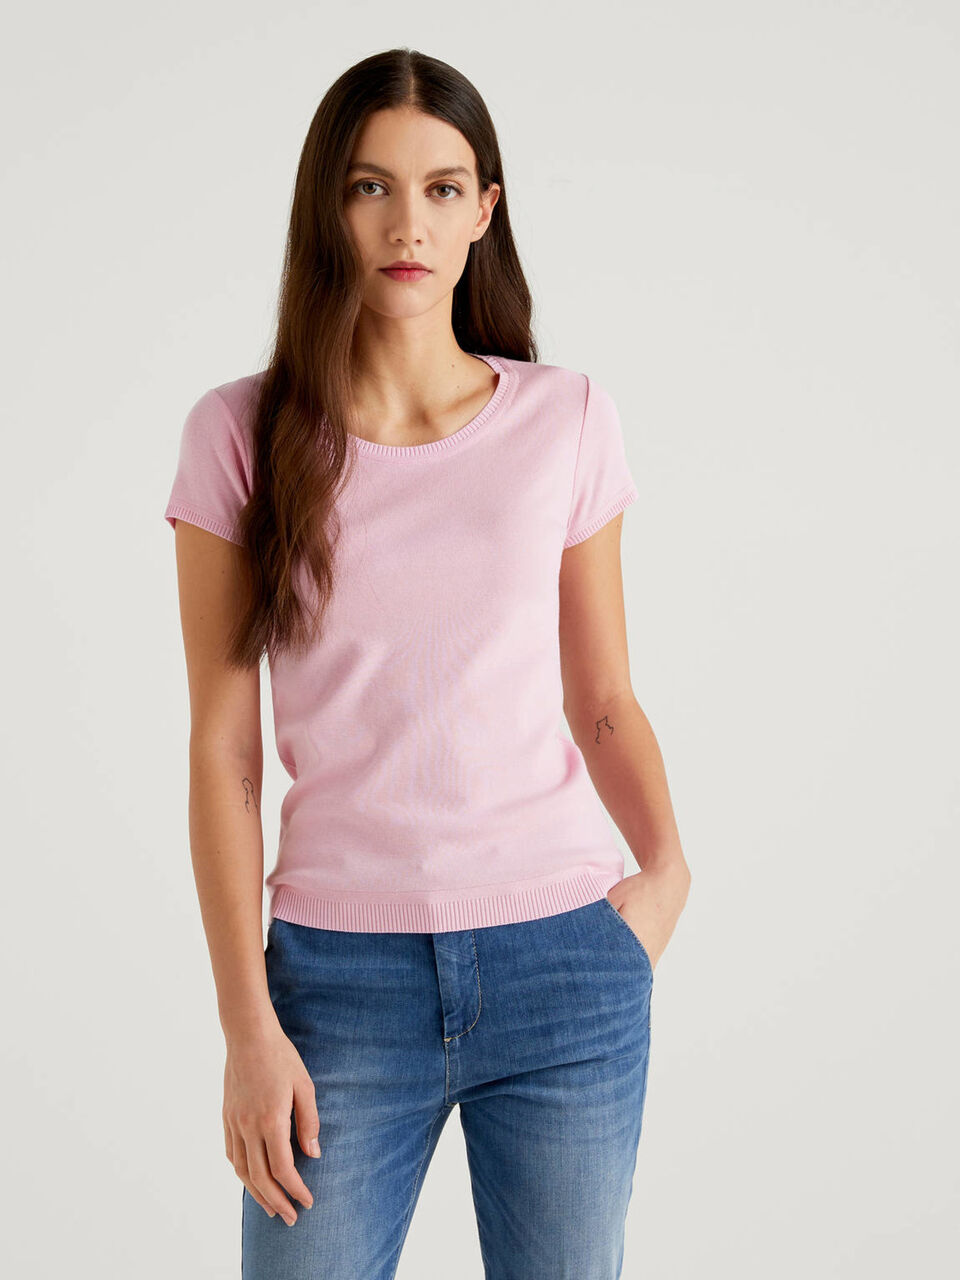 Short sleeve sweater in 100% cotton